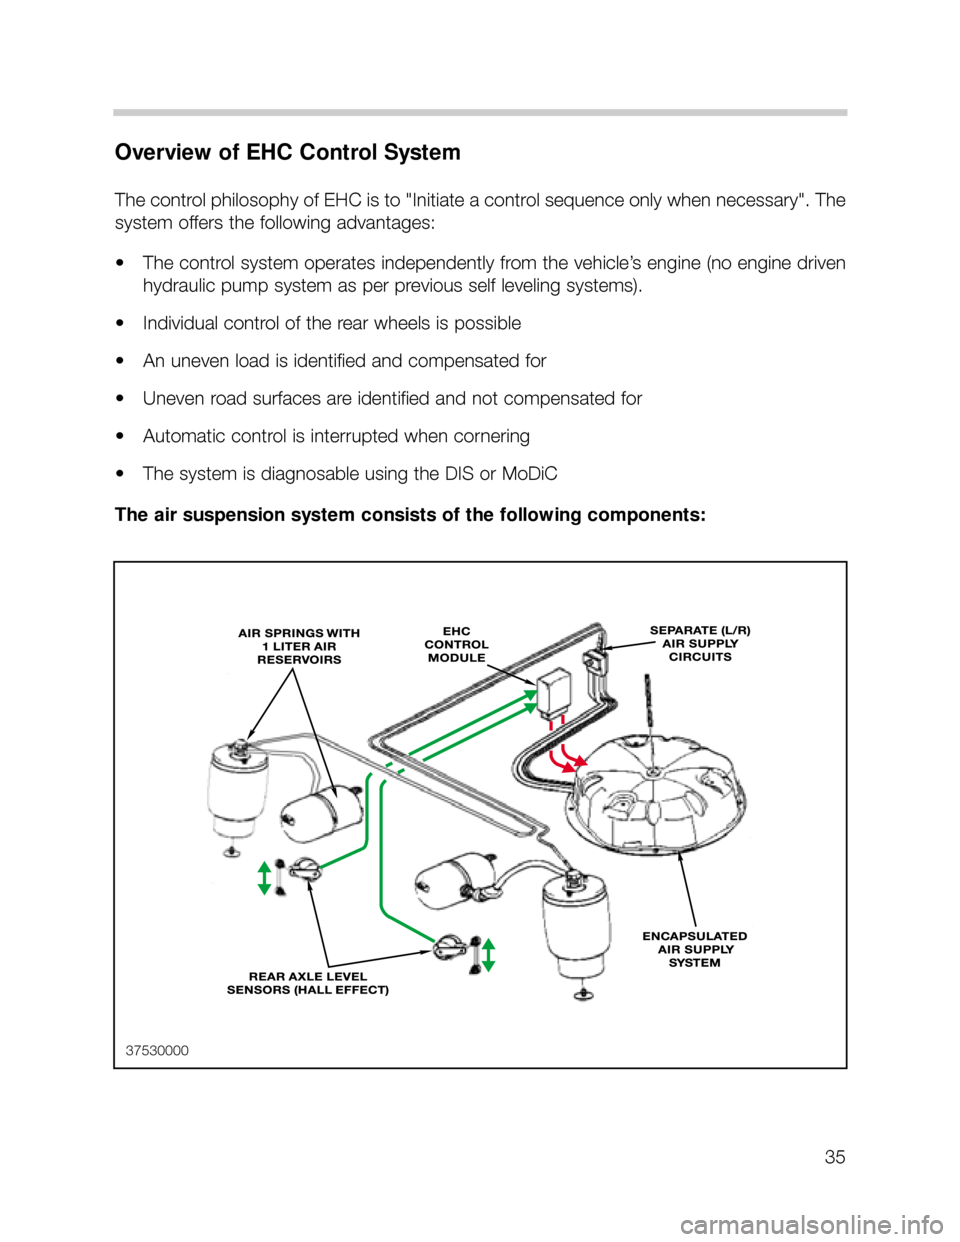 BMW X5 2004 E53 Owners Guide 35
Overview of EHC Control System
The control philosophy of EHC is to "Initiate a control sequence only when necessary". The
system offers the following advantages:
• The control system operates ind